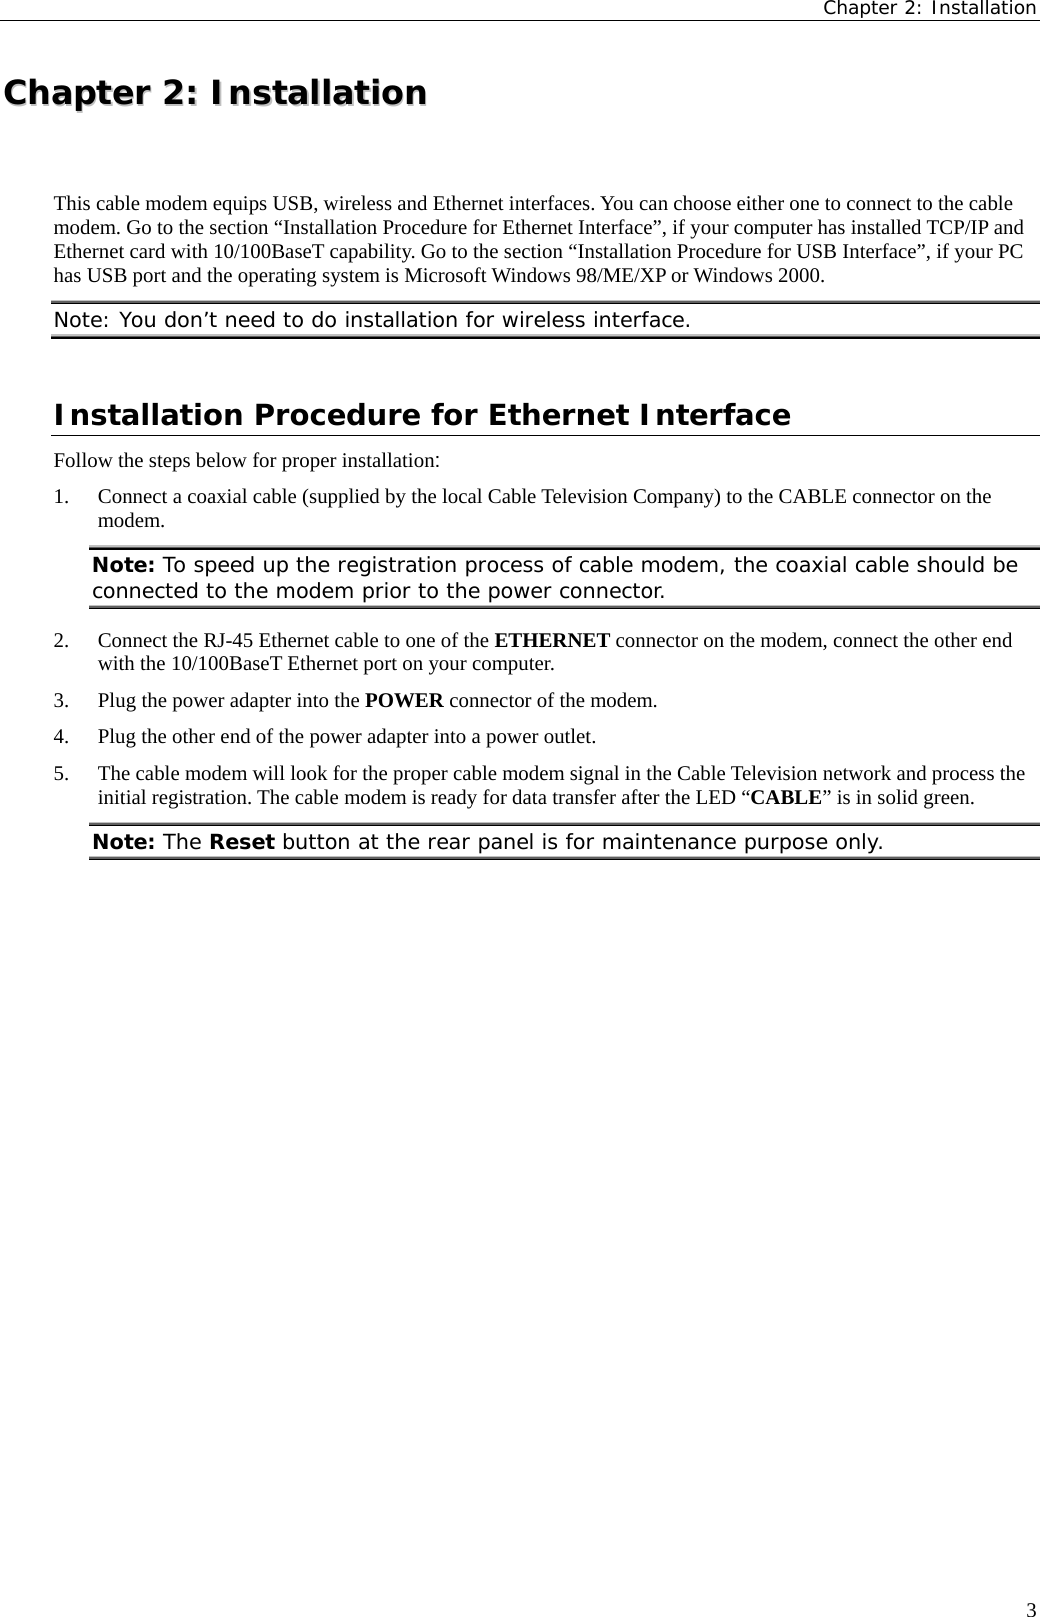 Chapter 2: Installation  CChhaapptteerr  22::  IInnssttaallllaattiioonn  This cable modem equips USB, wireless and Ethernet interfaces. You can choose either one to connect to the cable modem. Go to the section “Installation Procedure for Ethernet Interface”, if your computer has installed TCP/IP and Ethernet card with 10/100BaseT capability. Go to the section “Installation Procedure for USB Interface”, if your PC has USB port and the operating system is Microsoft Windows 98/ME/XP or Windows 2000. Note: You don’t need to do installation for wireless interface. Installation Procedure for Ethernet Interface Follow the steps below for proper installation: 1.  Connect a coaxial cable (supplied by the local Cable Television Company) to the CABLE connector on the modem. Note: To speed up the registration process of cable modem, the coaxial cable should be connected to the modem prior to the power connector. 2.  Connect the RJ-45 Ethernet cable to one of the ETHERNET connector on the modem, connect the other end with the 10/100BaseT Ethernet port on your computer. 3.  Plug the power adapter into the POWER connector of the modem. 4.  Plug the other end of the power adapter into a power outlet. 5.  The cable modem will look for the proper cable modem signal in the Cable Television network and process the initial registration. The cable modem is ready for data transfer after the LED “CABLE” is in solid green. Note: The Reset button at the rear panel is for maintenance purpose only.   3